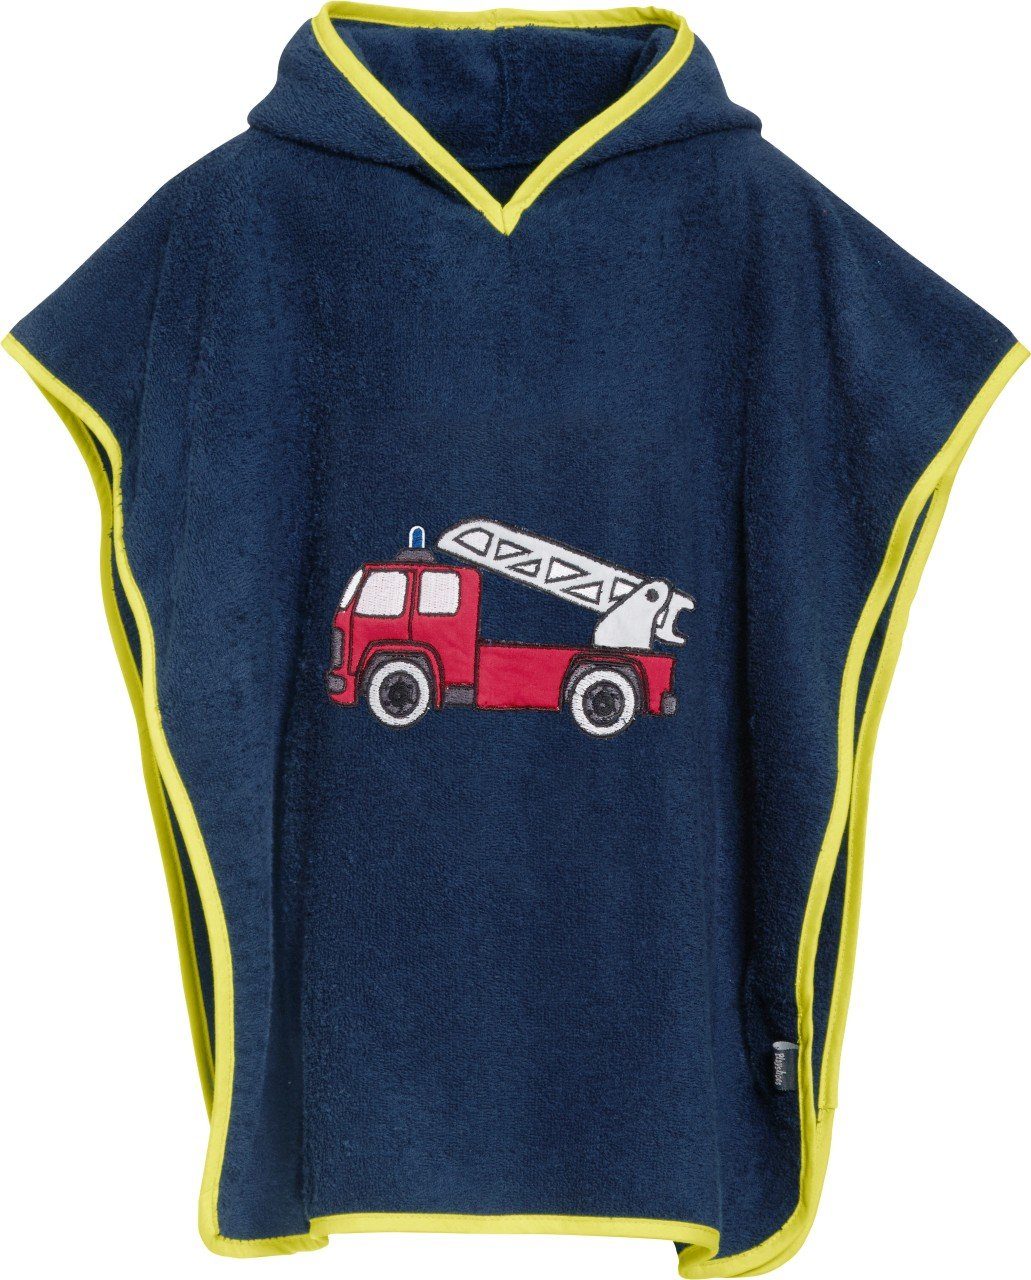 Playshoes Badeponcho aus Feuerwehr, Frottee-Poncho flauschigem Badeponcho saugfähigem Frottee und